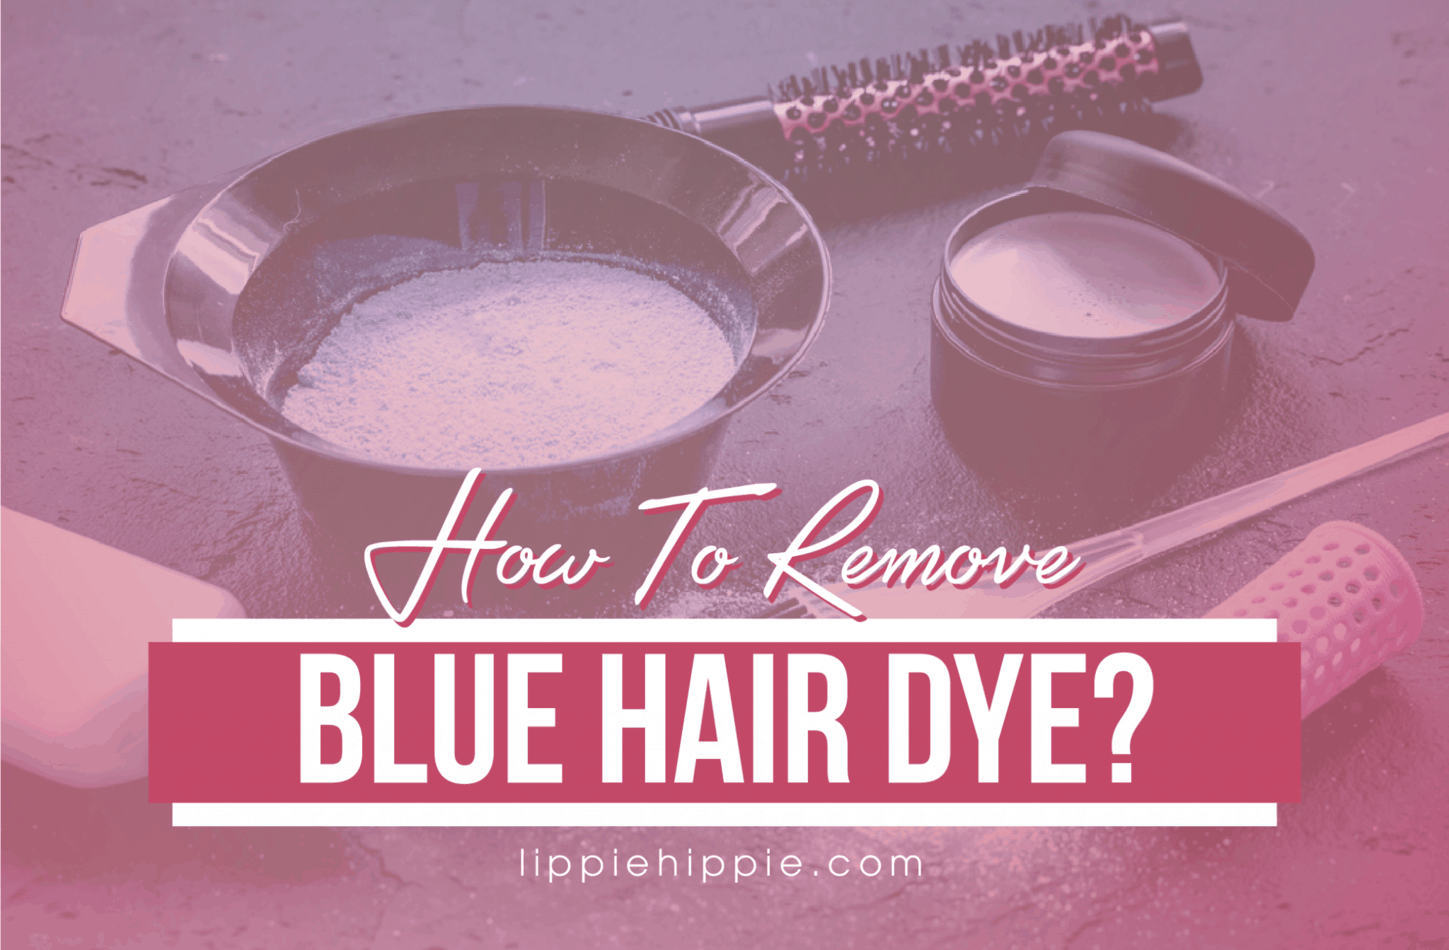 How to Remove Blue Hair Dye - wide 2